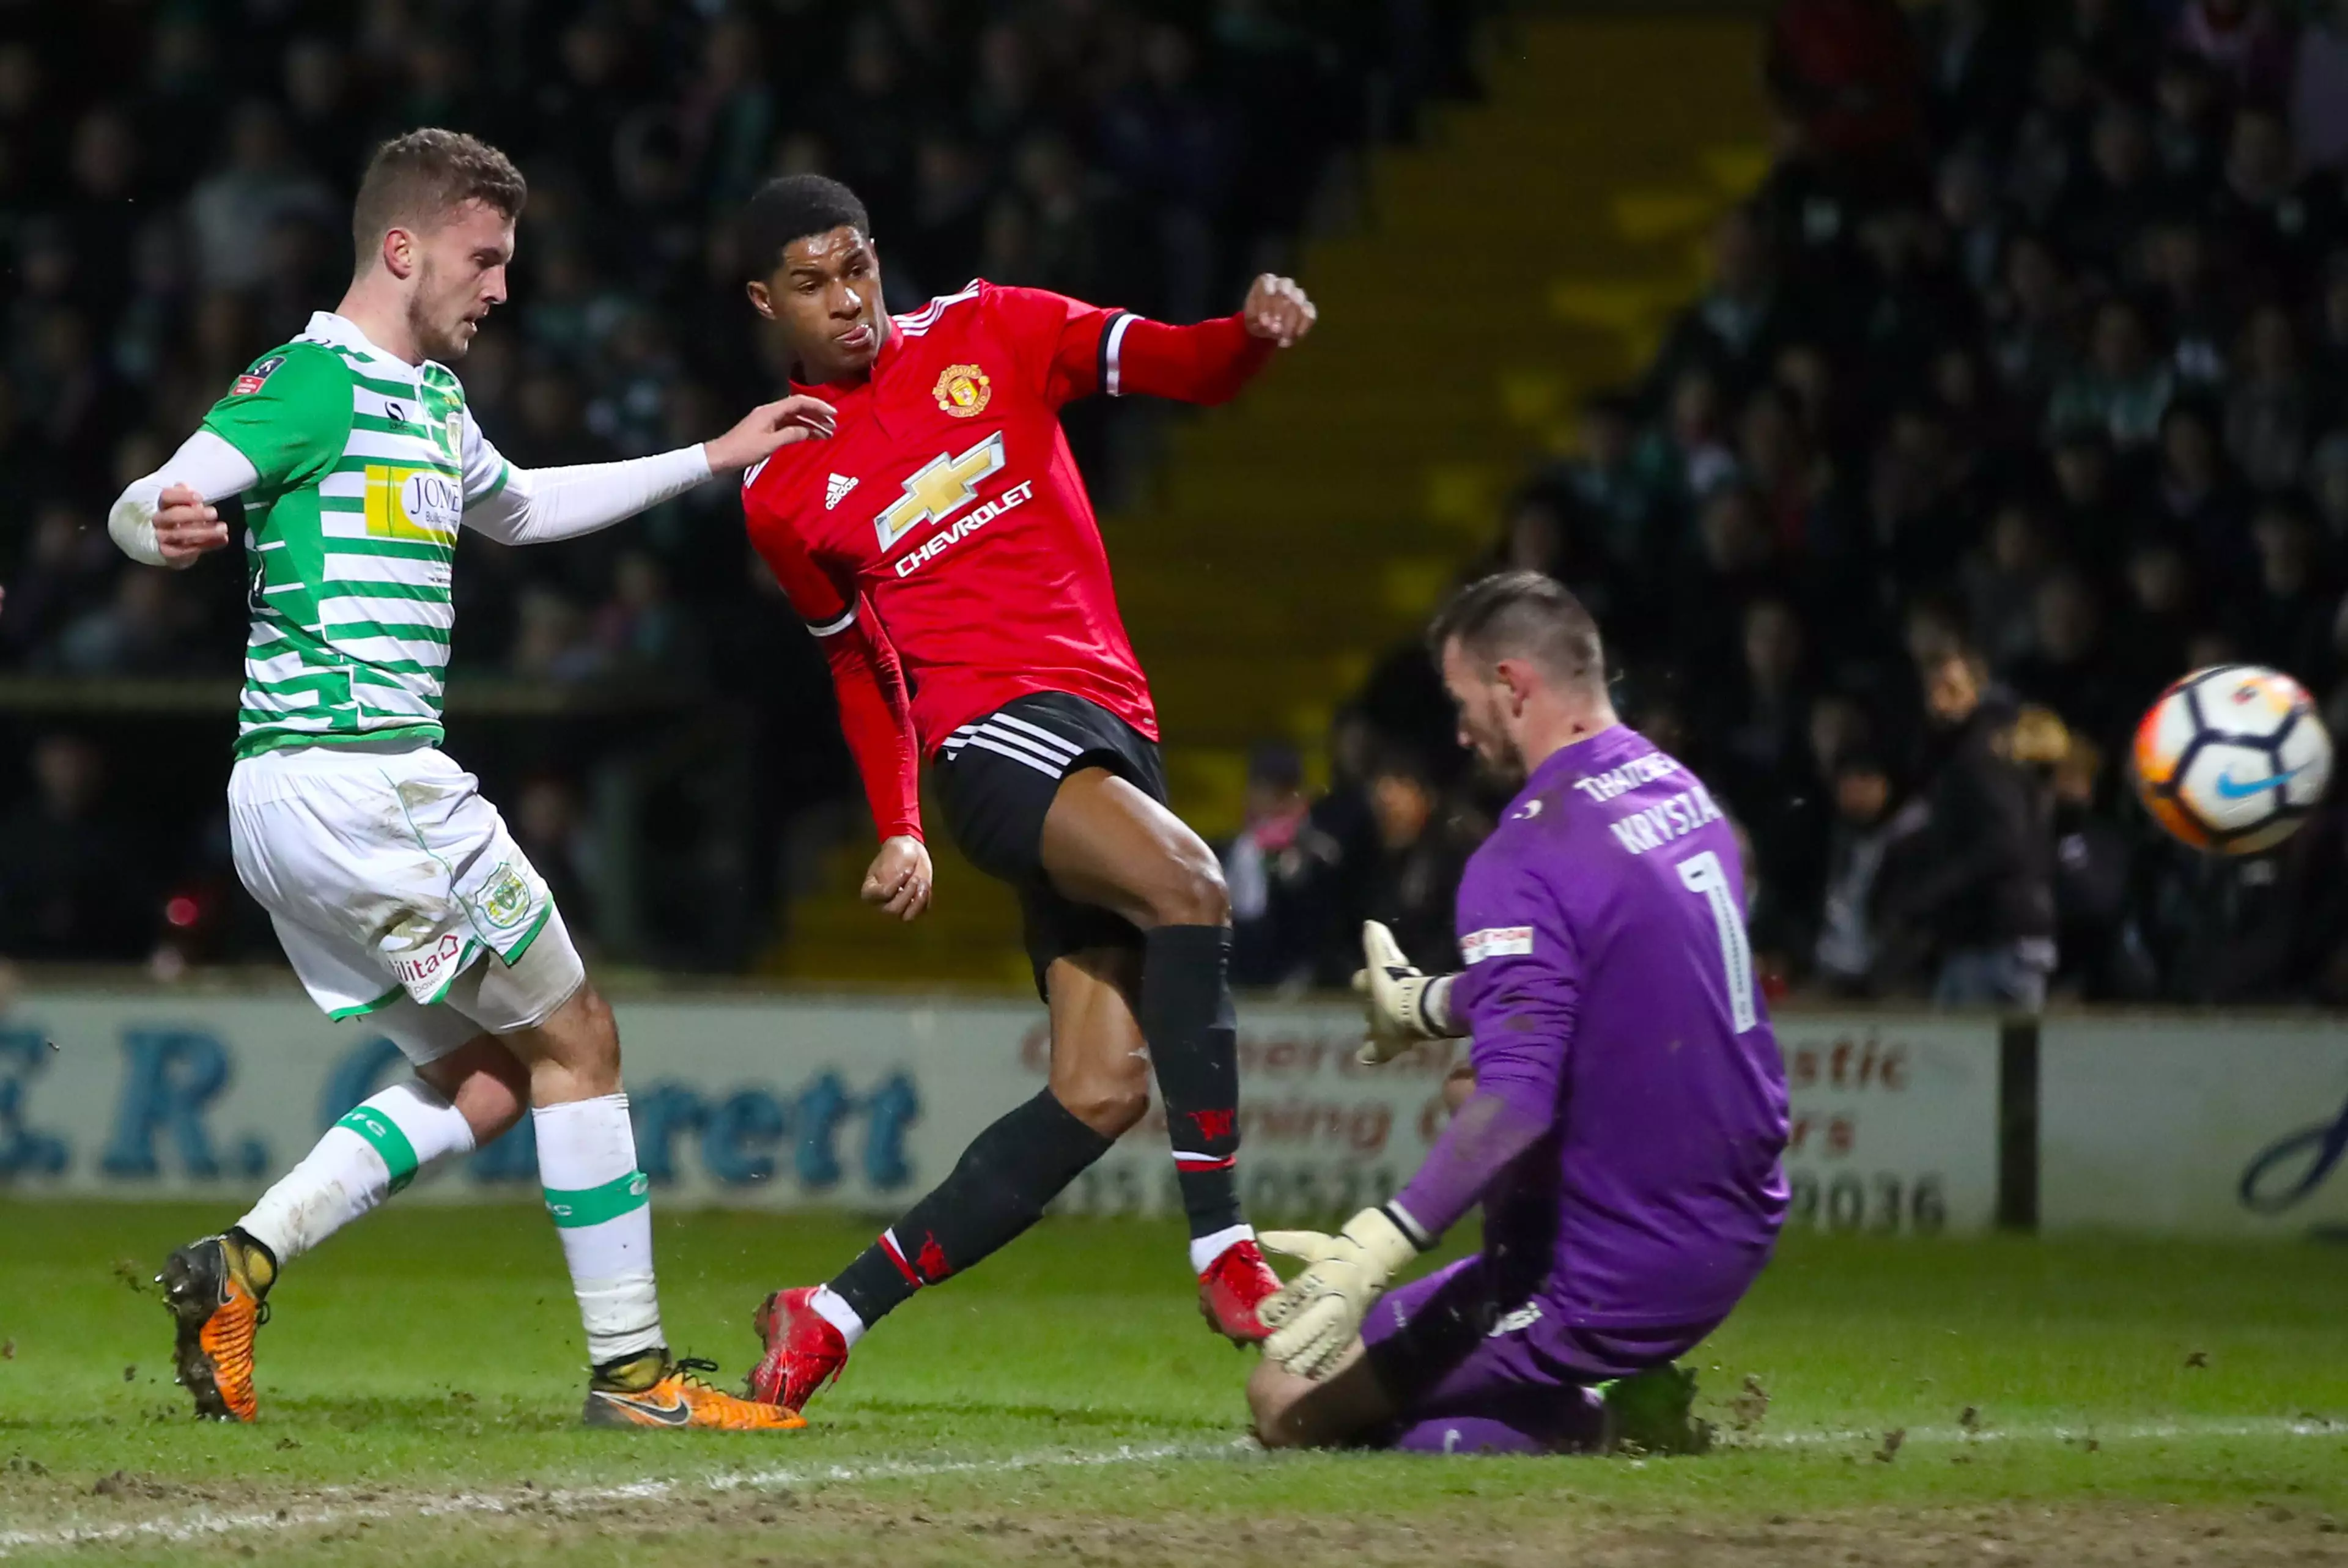 Rashford scores for United in the FA Cup. Image: PA